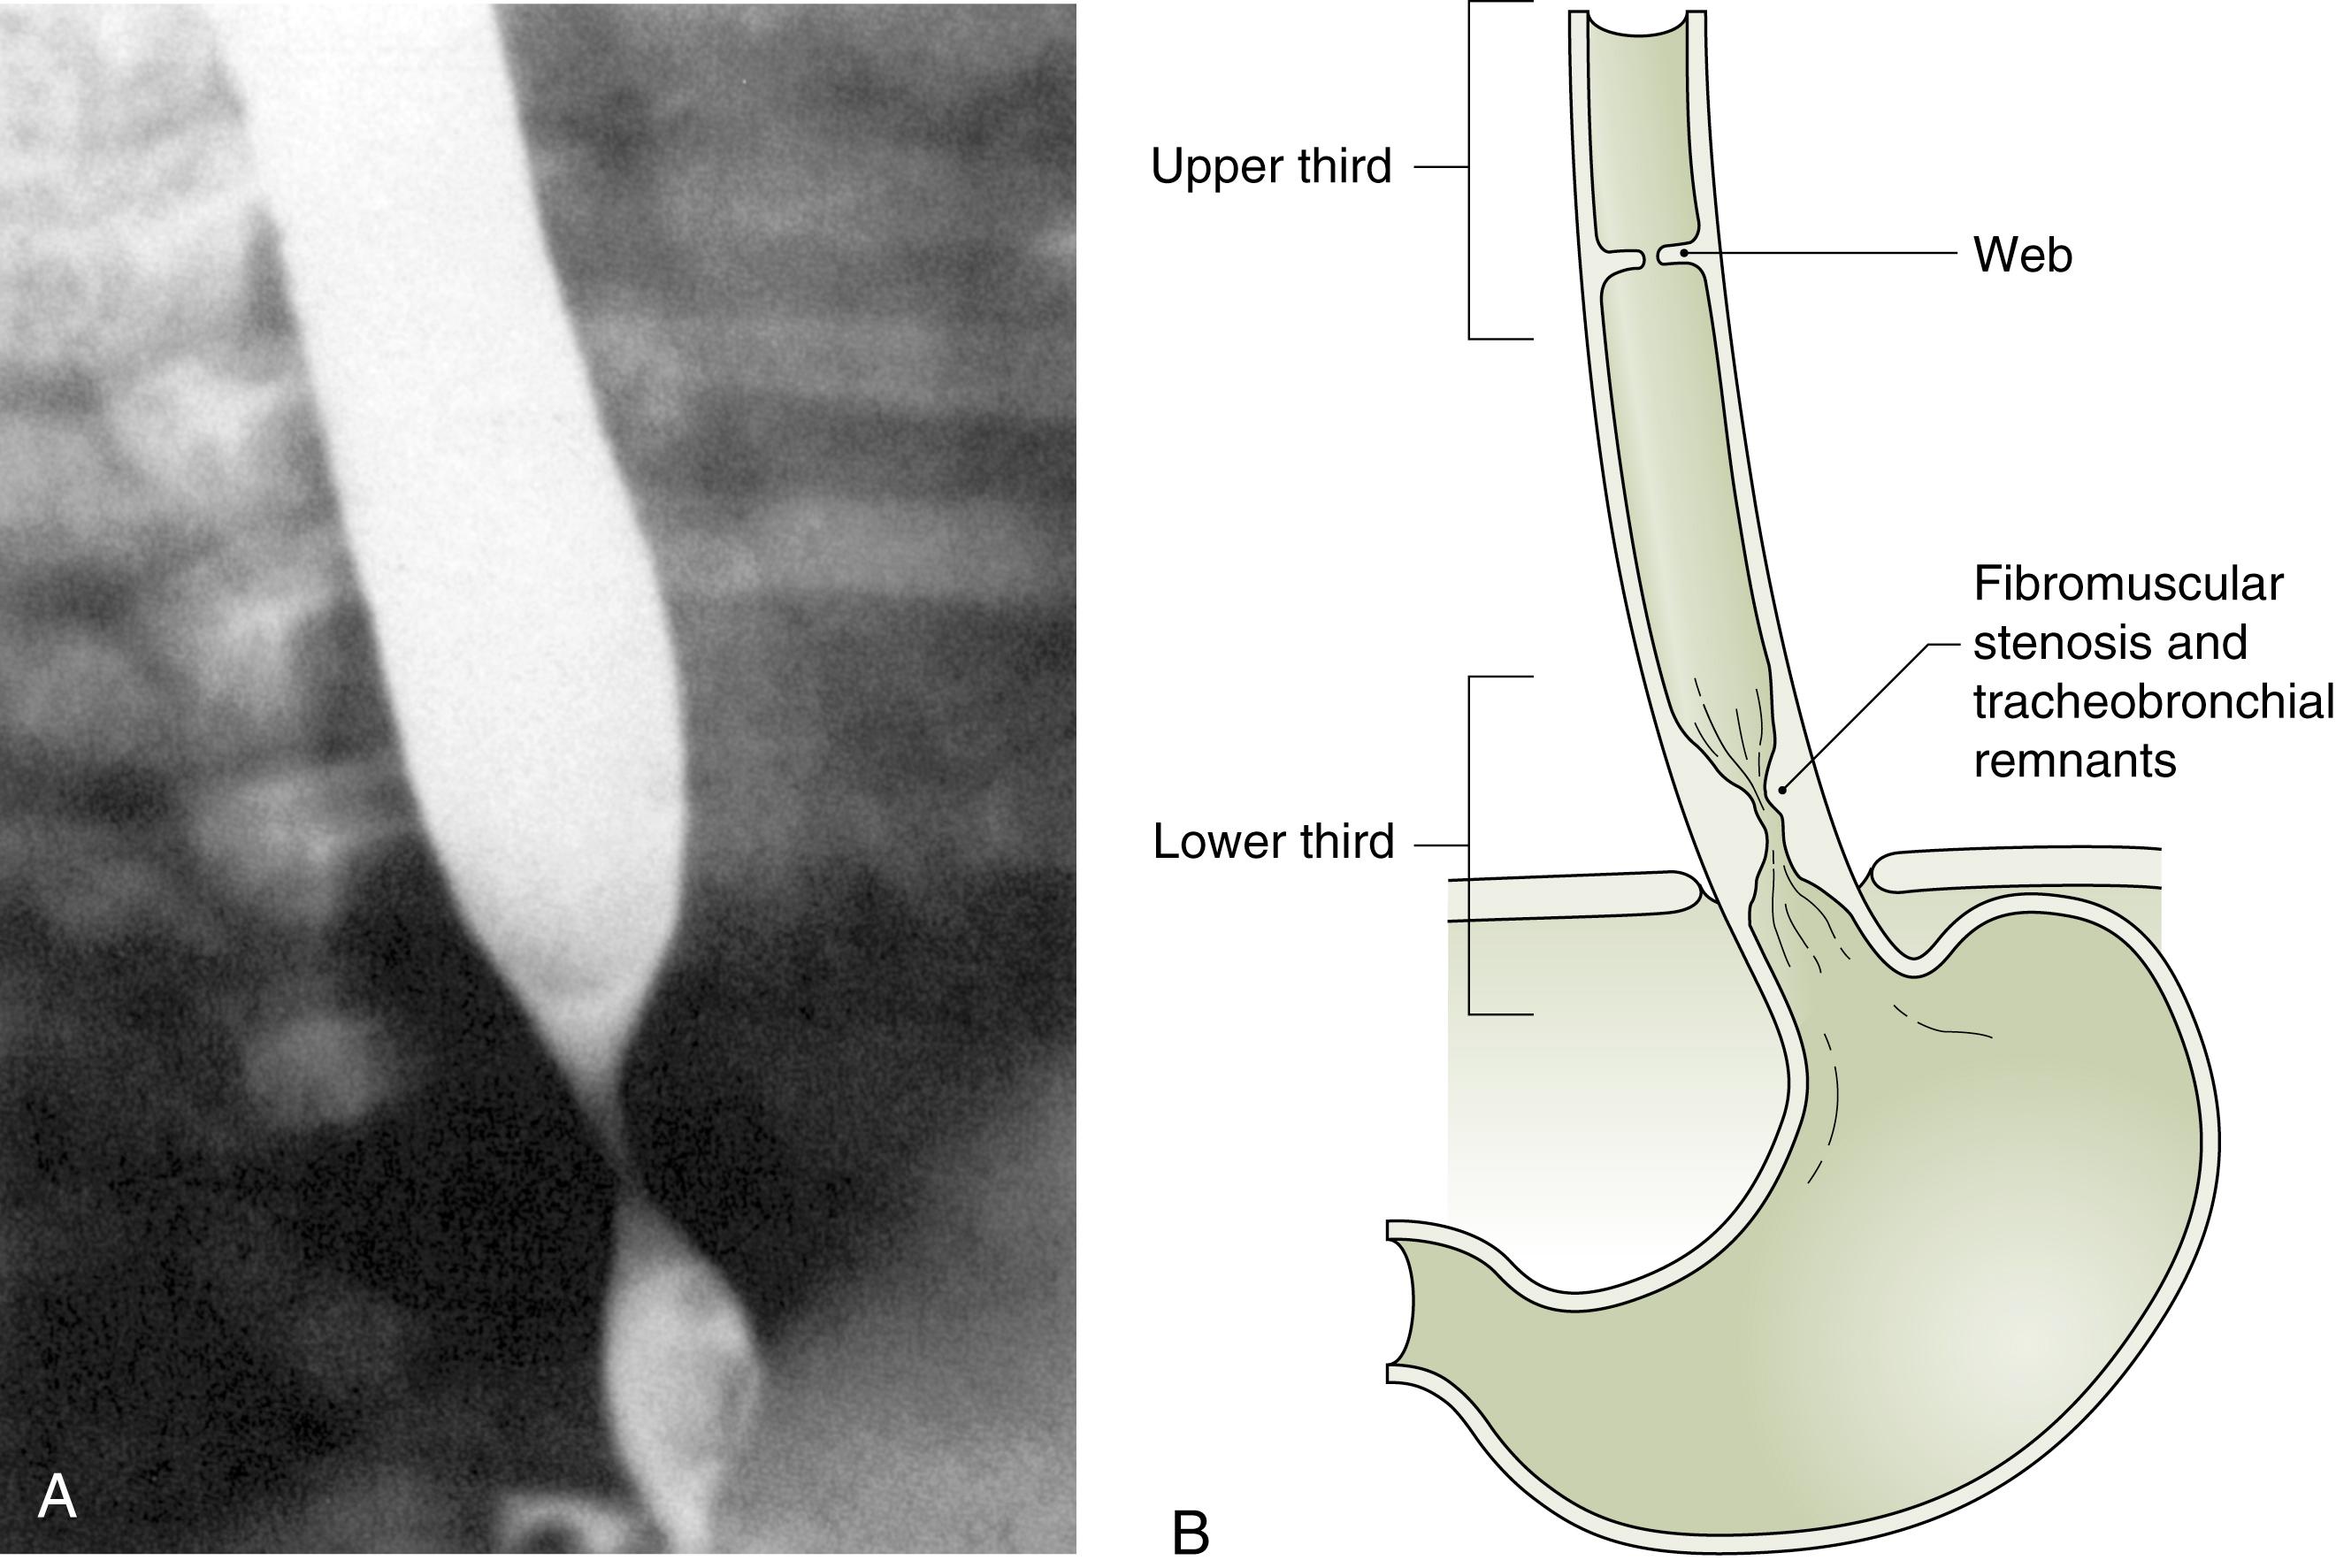 Fig. 20.1, (A) Barium esophagram performed in a 1-month-old infant with dysphagia shows a congenital esophageal stenosis in the distal esophagus and proximal esophageal dilation. This is characteristic of a fibromuscular stenosis or a stenosis from a persistent cartilaginous remnant. (B) The usual location of the common forms of congenital esophageal stenosis: esophageal webs in the upper one-third of the esophagus, and fibromuscular stenosis or persistent cartilaginous tracheobronchial remnants in the distal one-third of the esophagus.